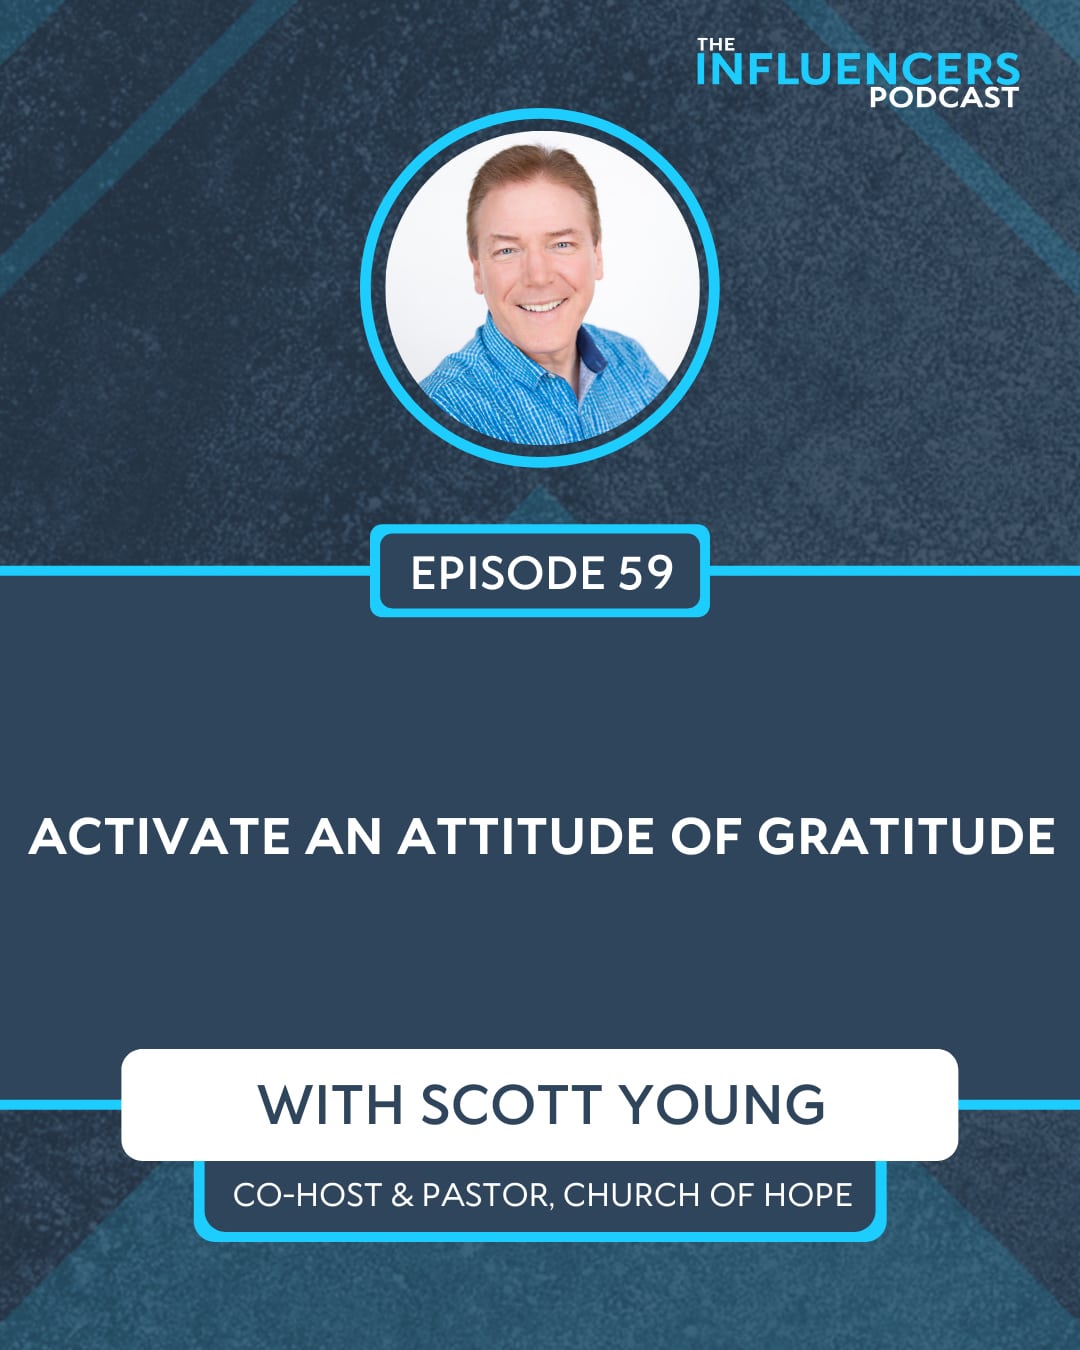 Episode 59 with Scott Young.